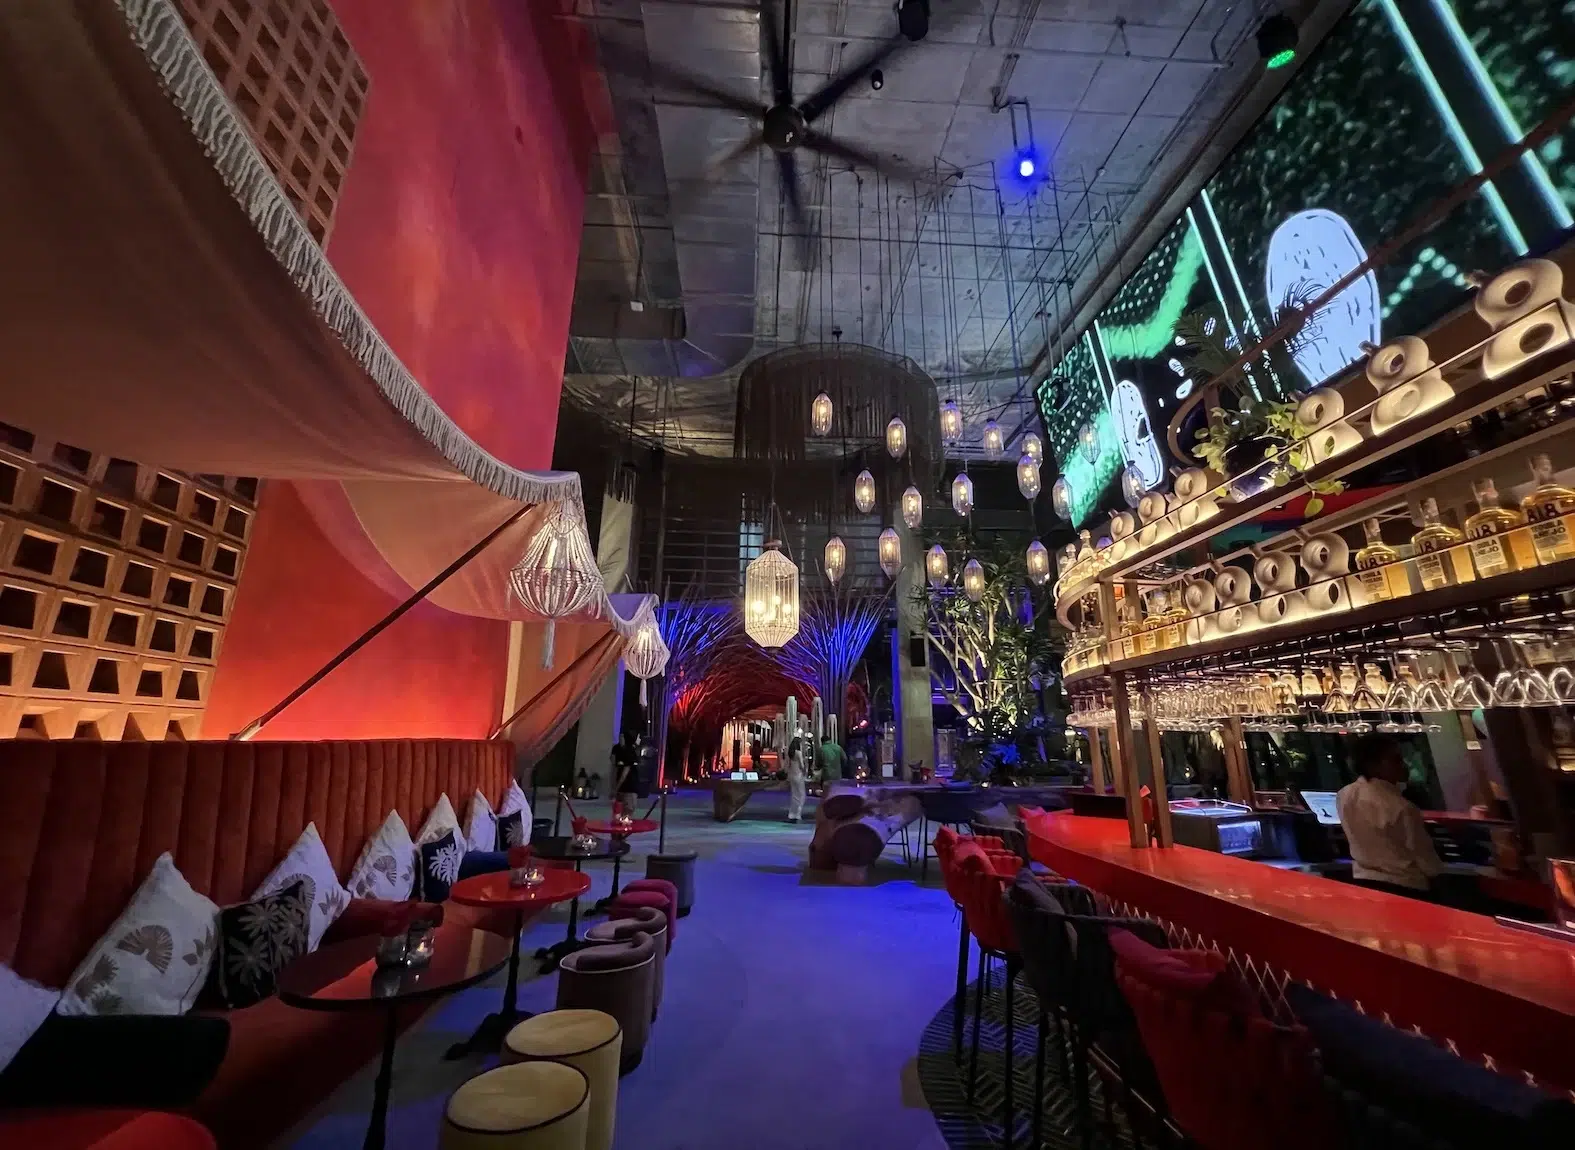 This photo shows the bar from Tribe Sky Beach Club located at EmSphere in Bangkok. You can see a mexican-like decor. This place seems to have a cozy vibe atmosphere.